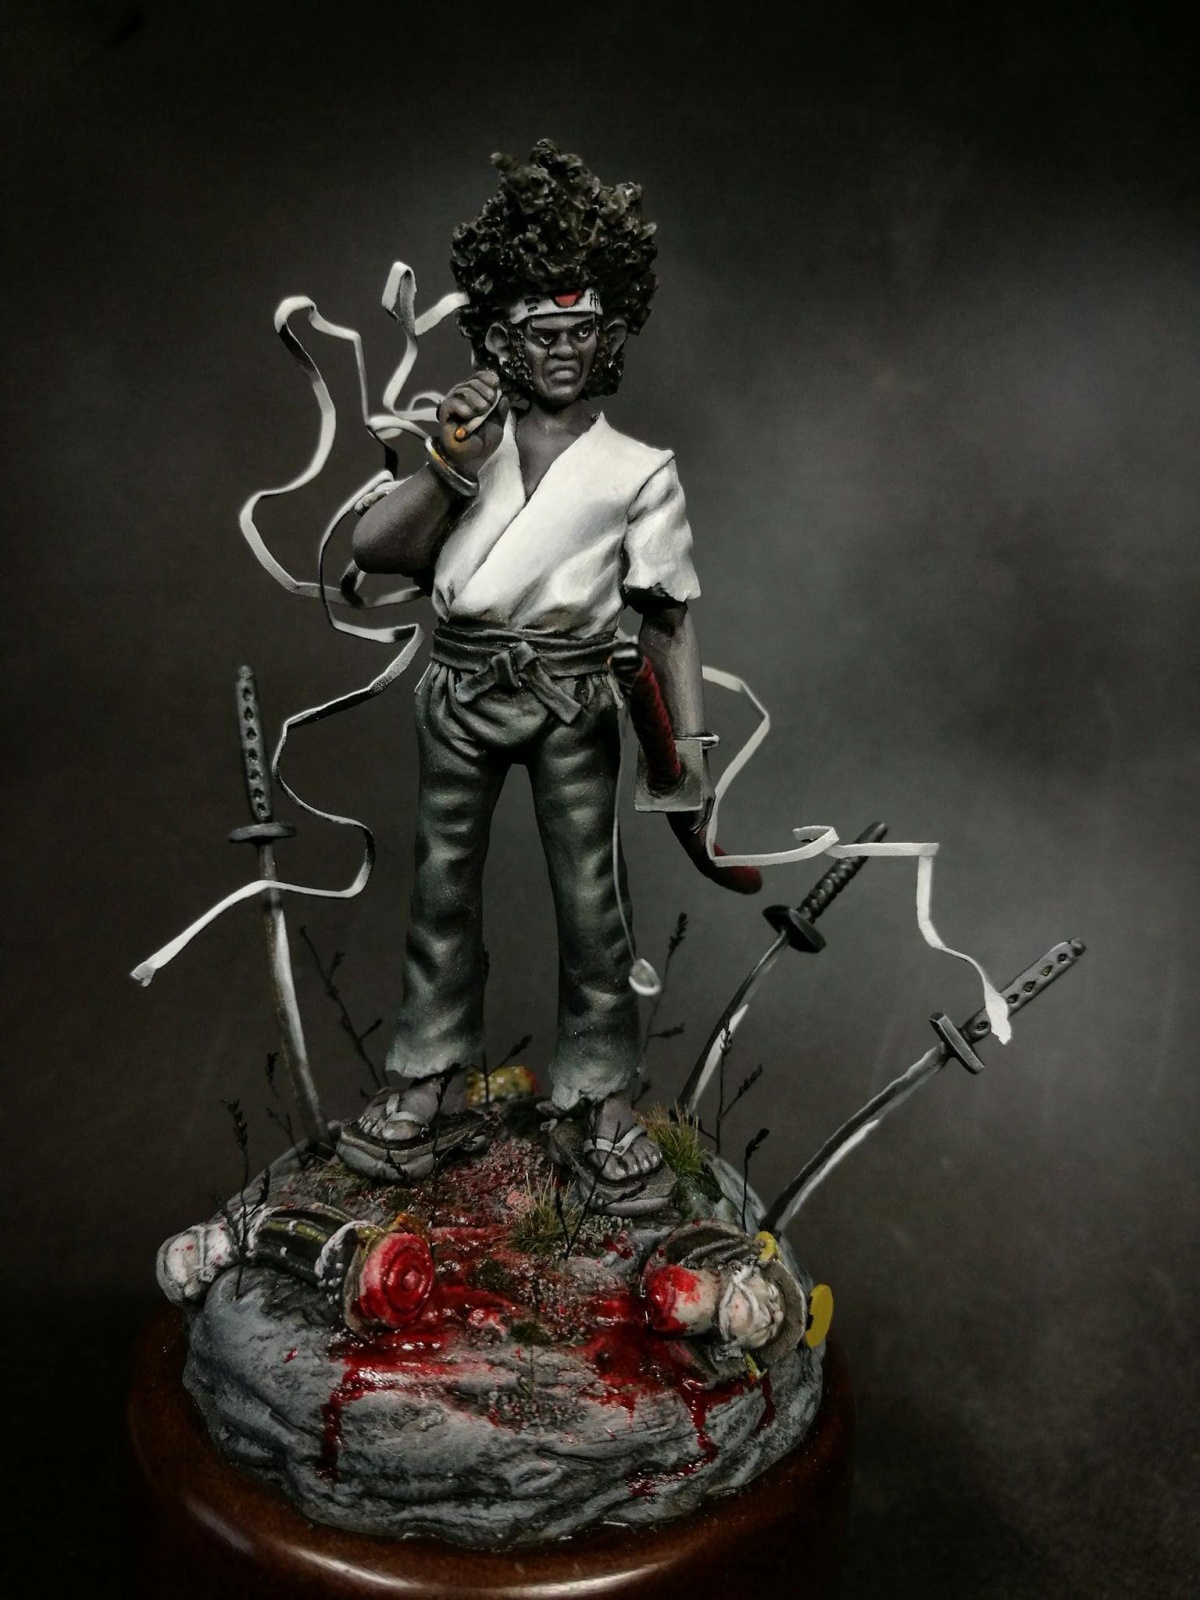 This is Big Haired Samurai converted to Afro Samurai. 